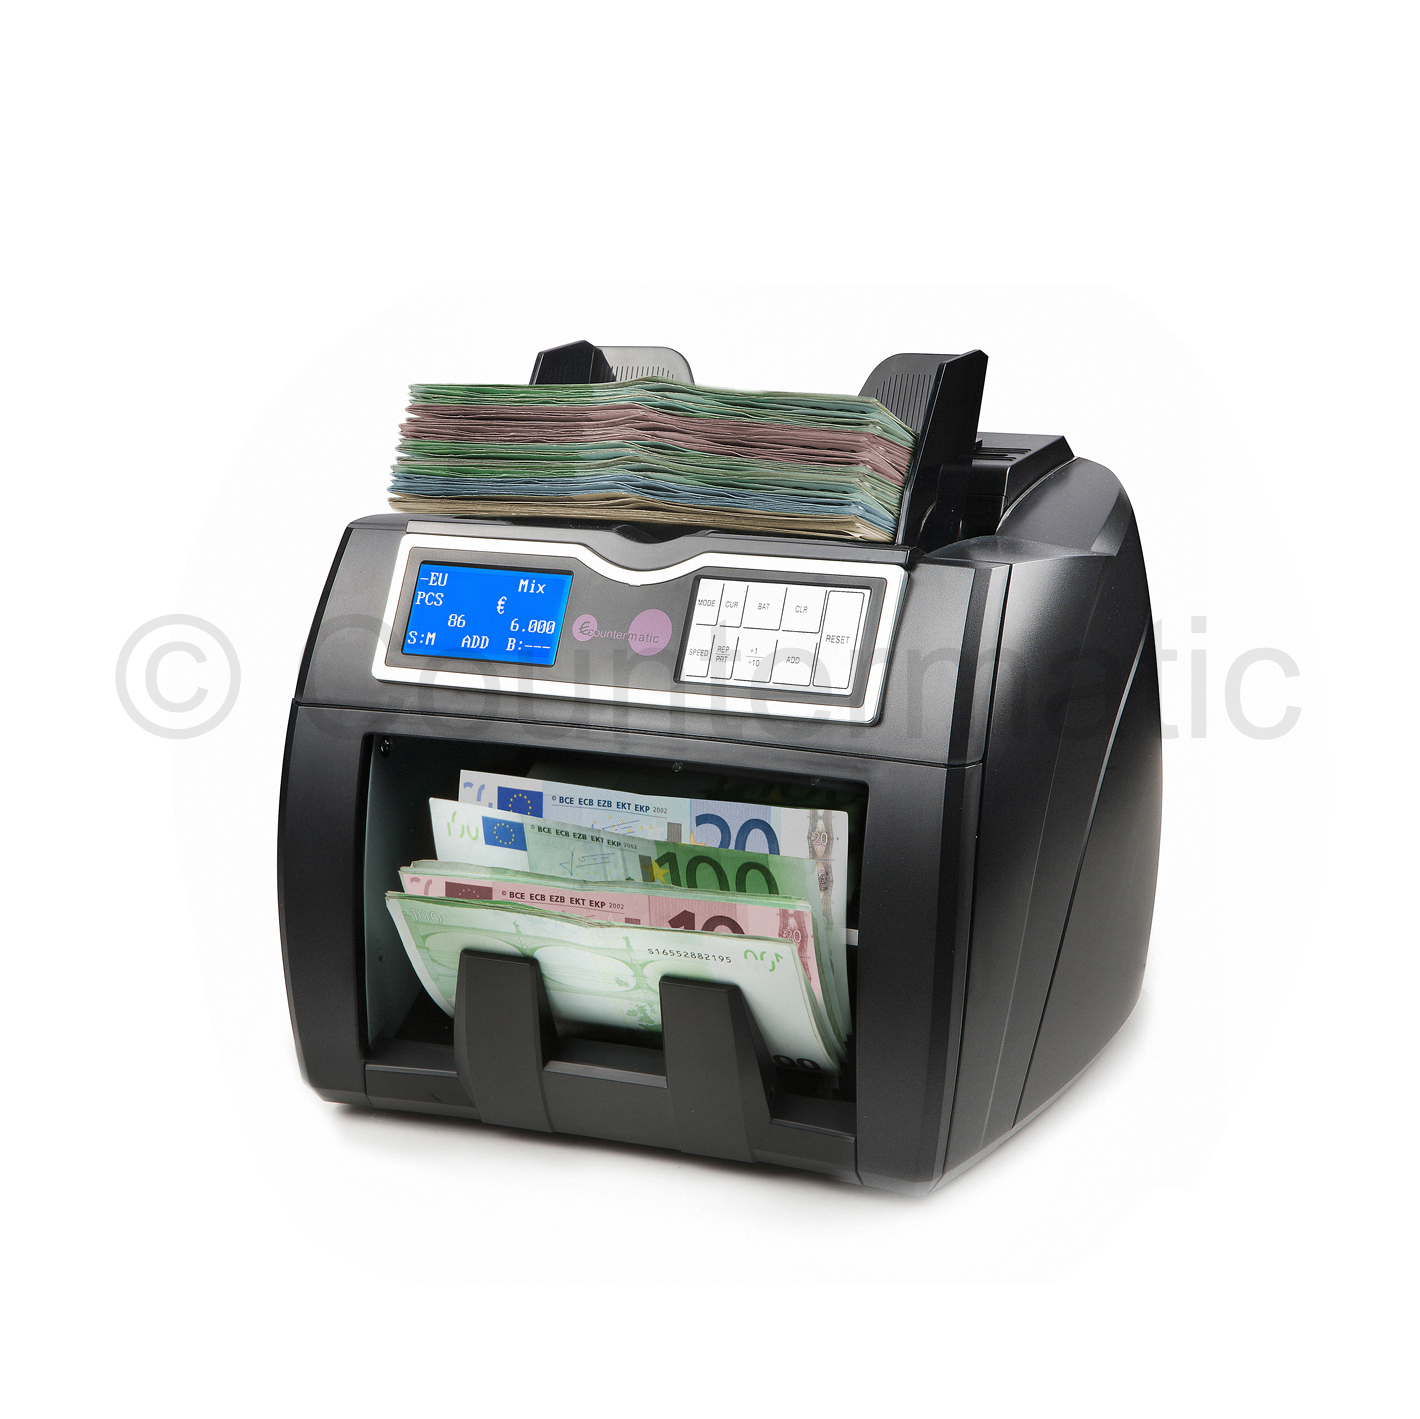 Value Banknote Counter